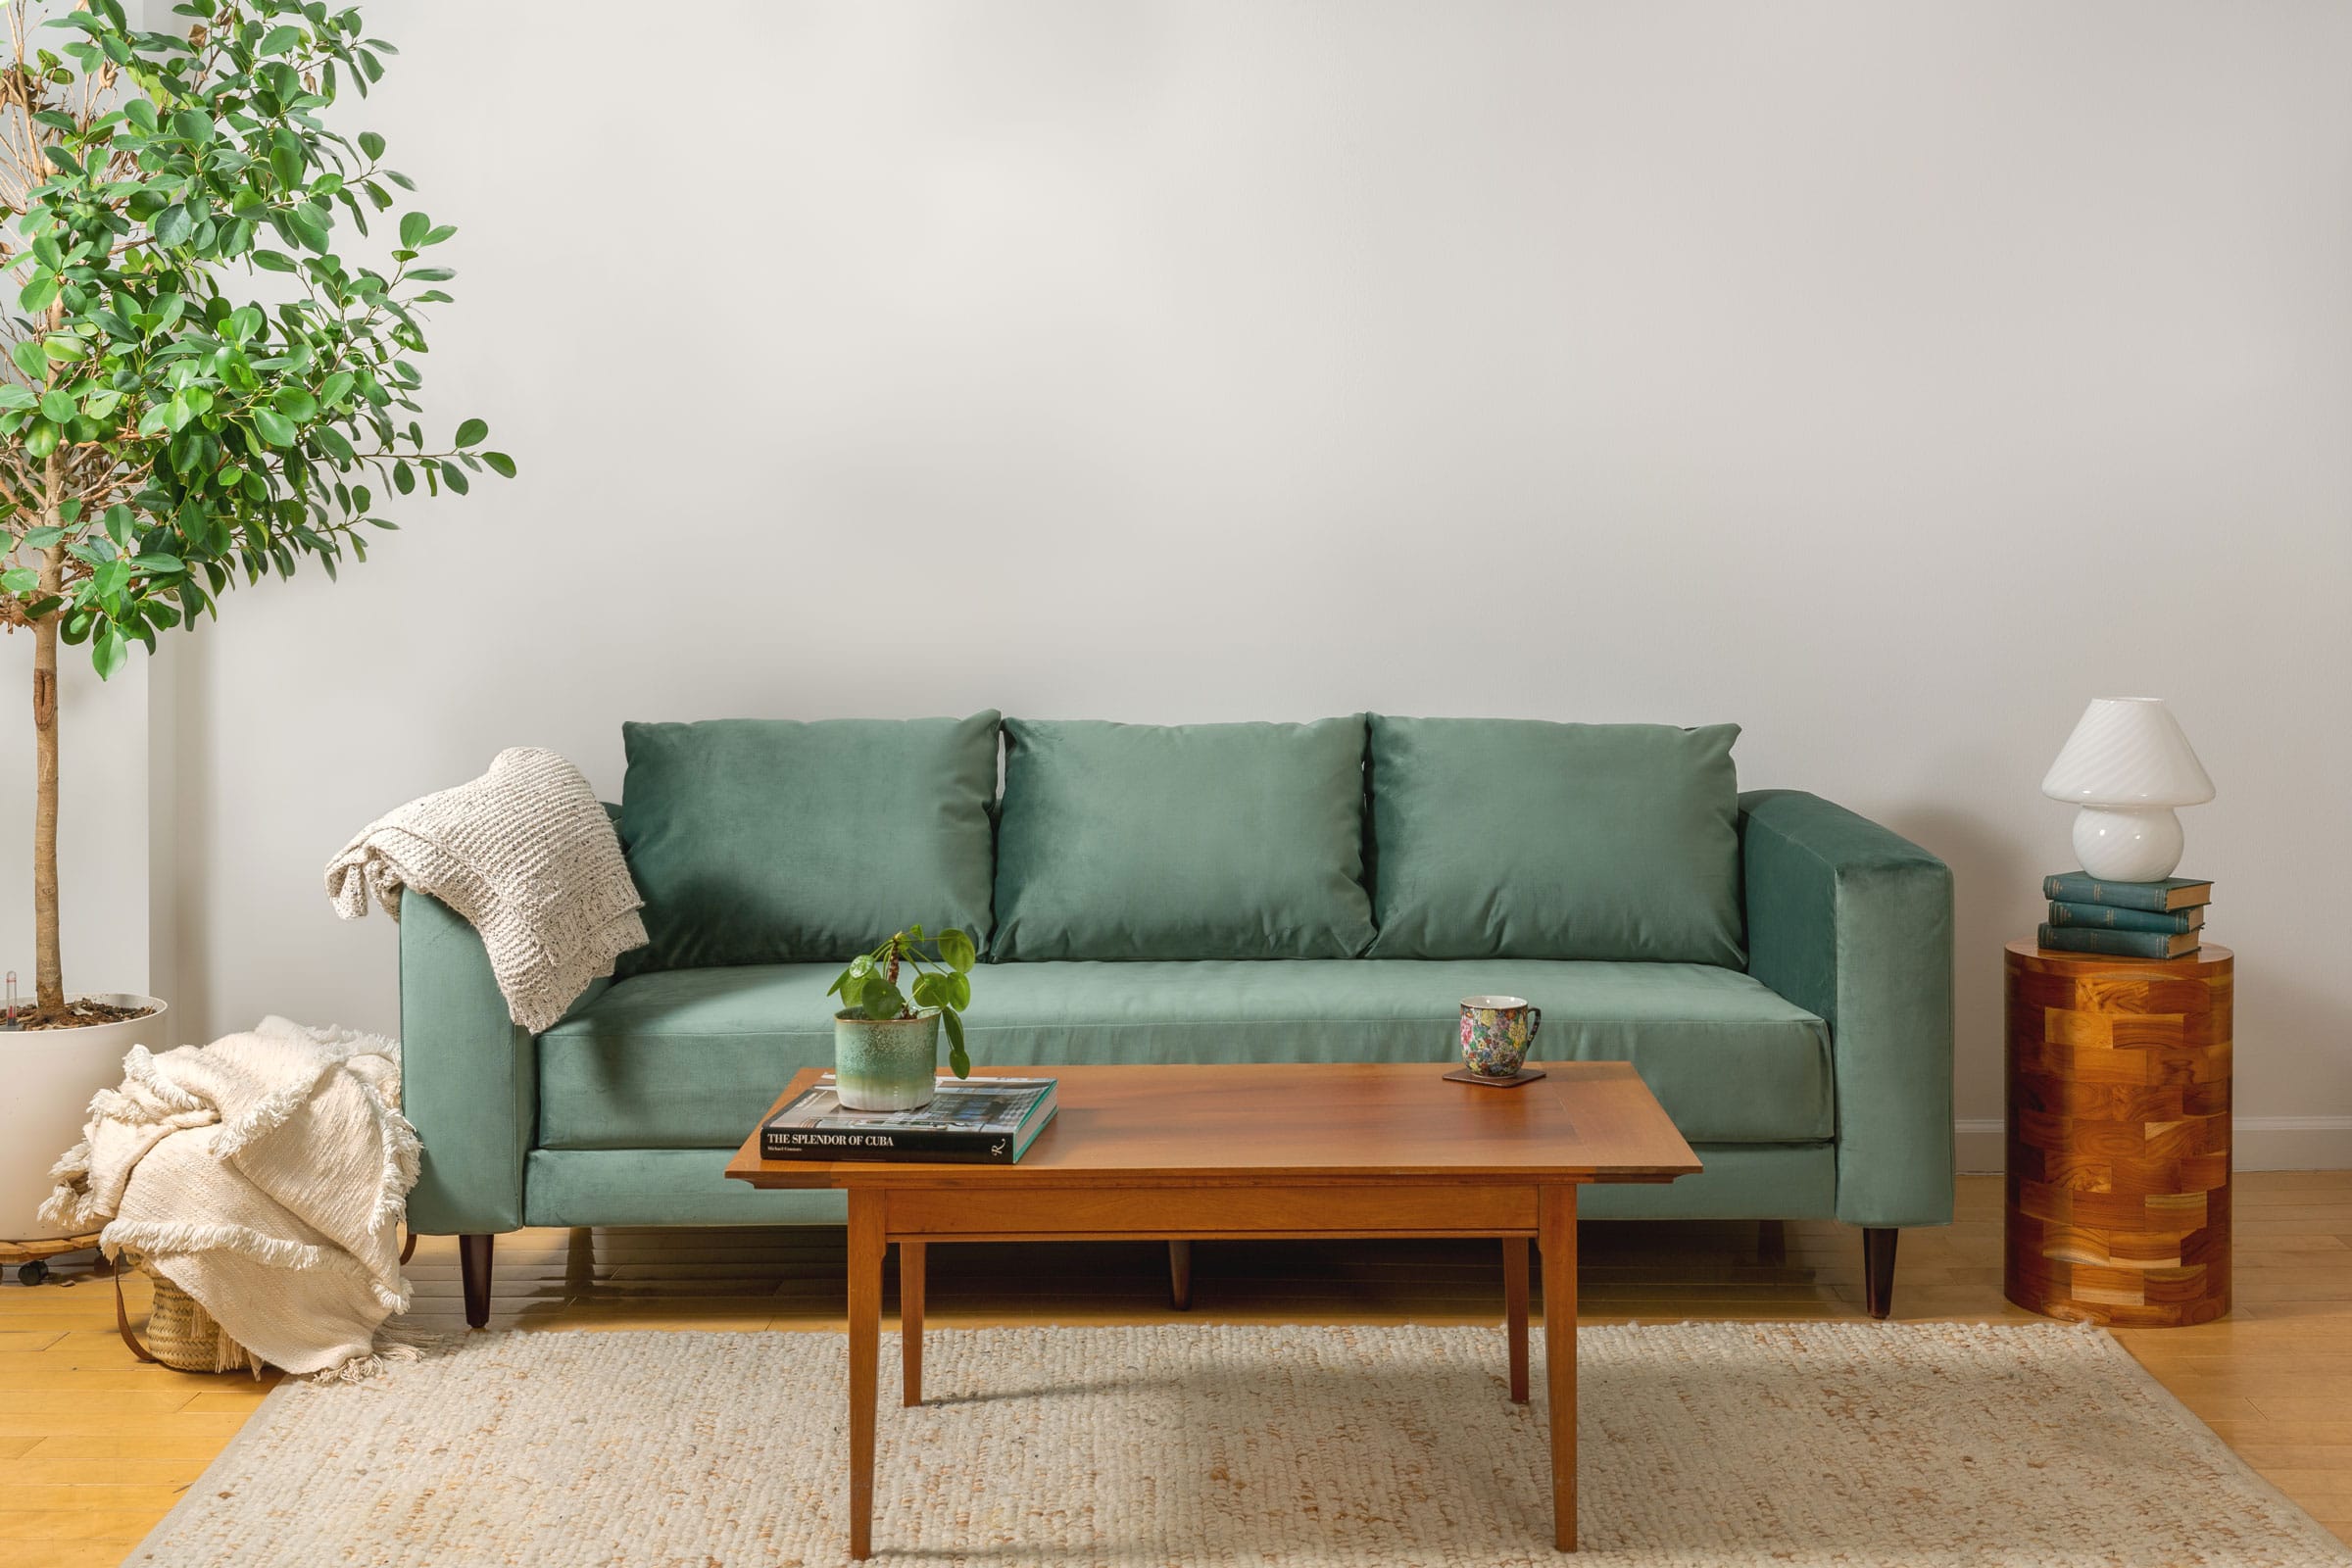 Sabai Makes Beautiful Velvet Couches Using Recycled Water Bottles